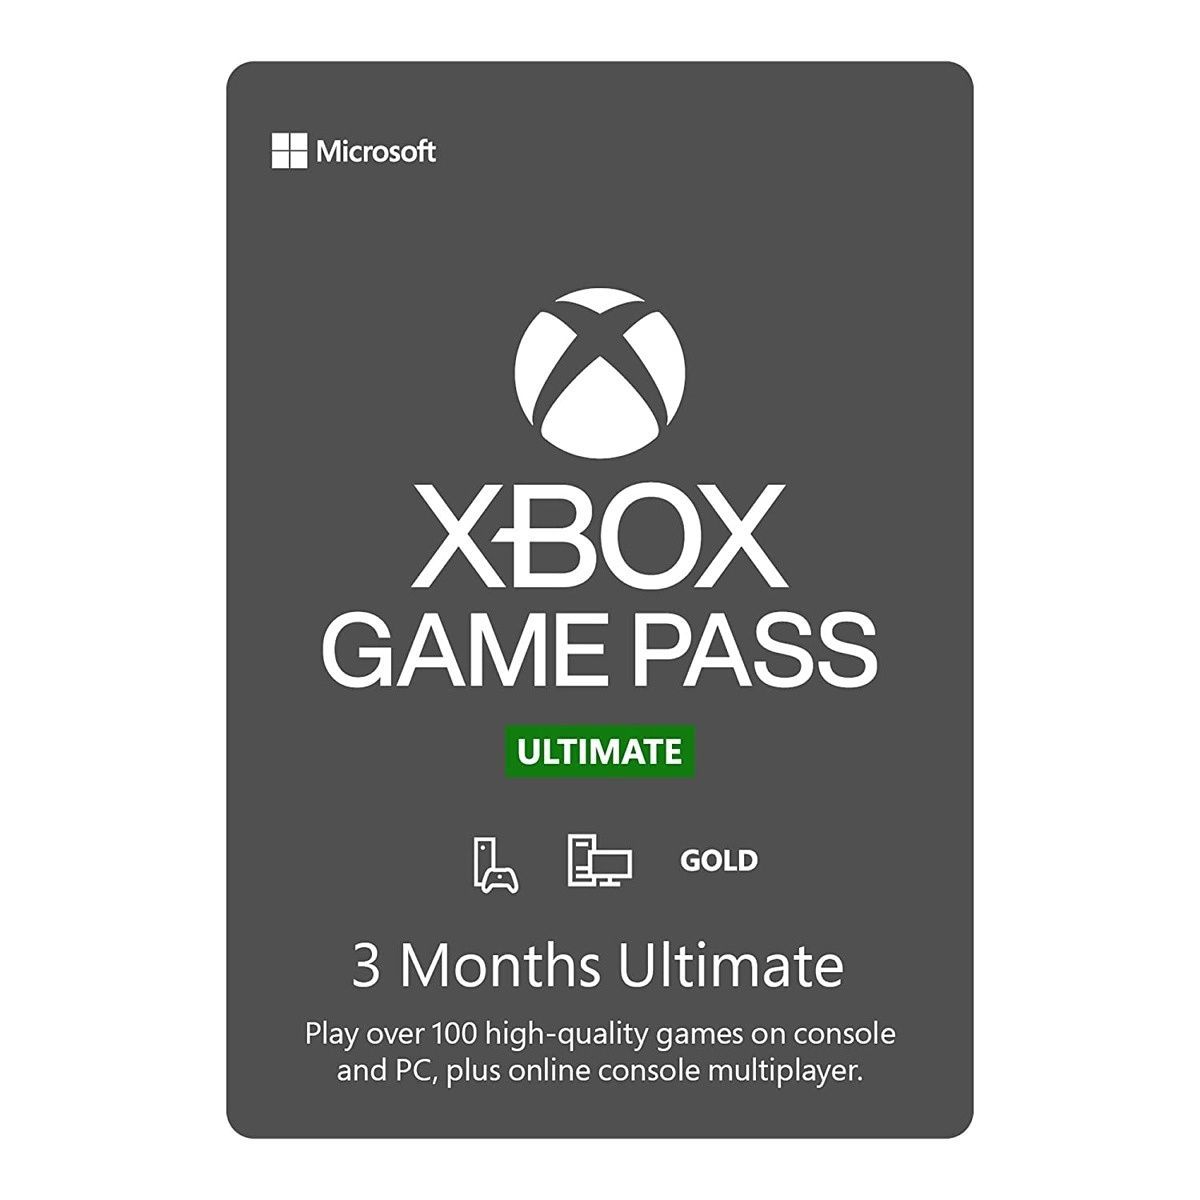 Xbox Game Pass Ultimate includes hundreds of games you can play on your Xbox console, PC, or through the cloud.